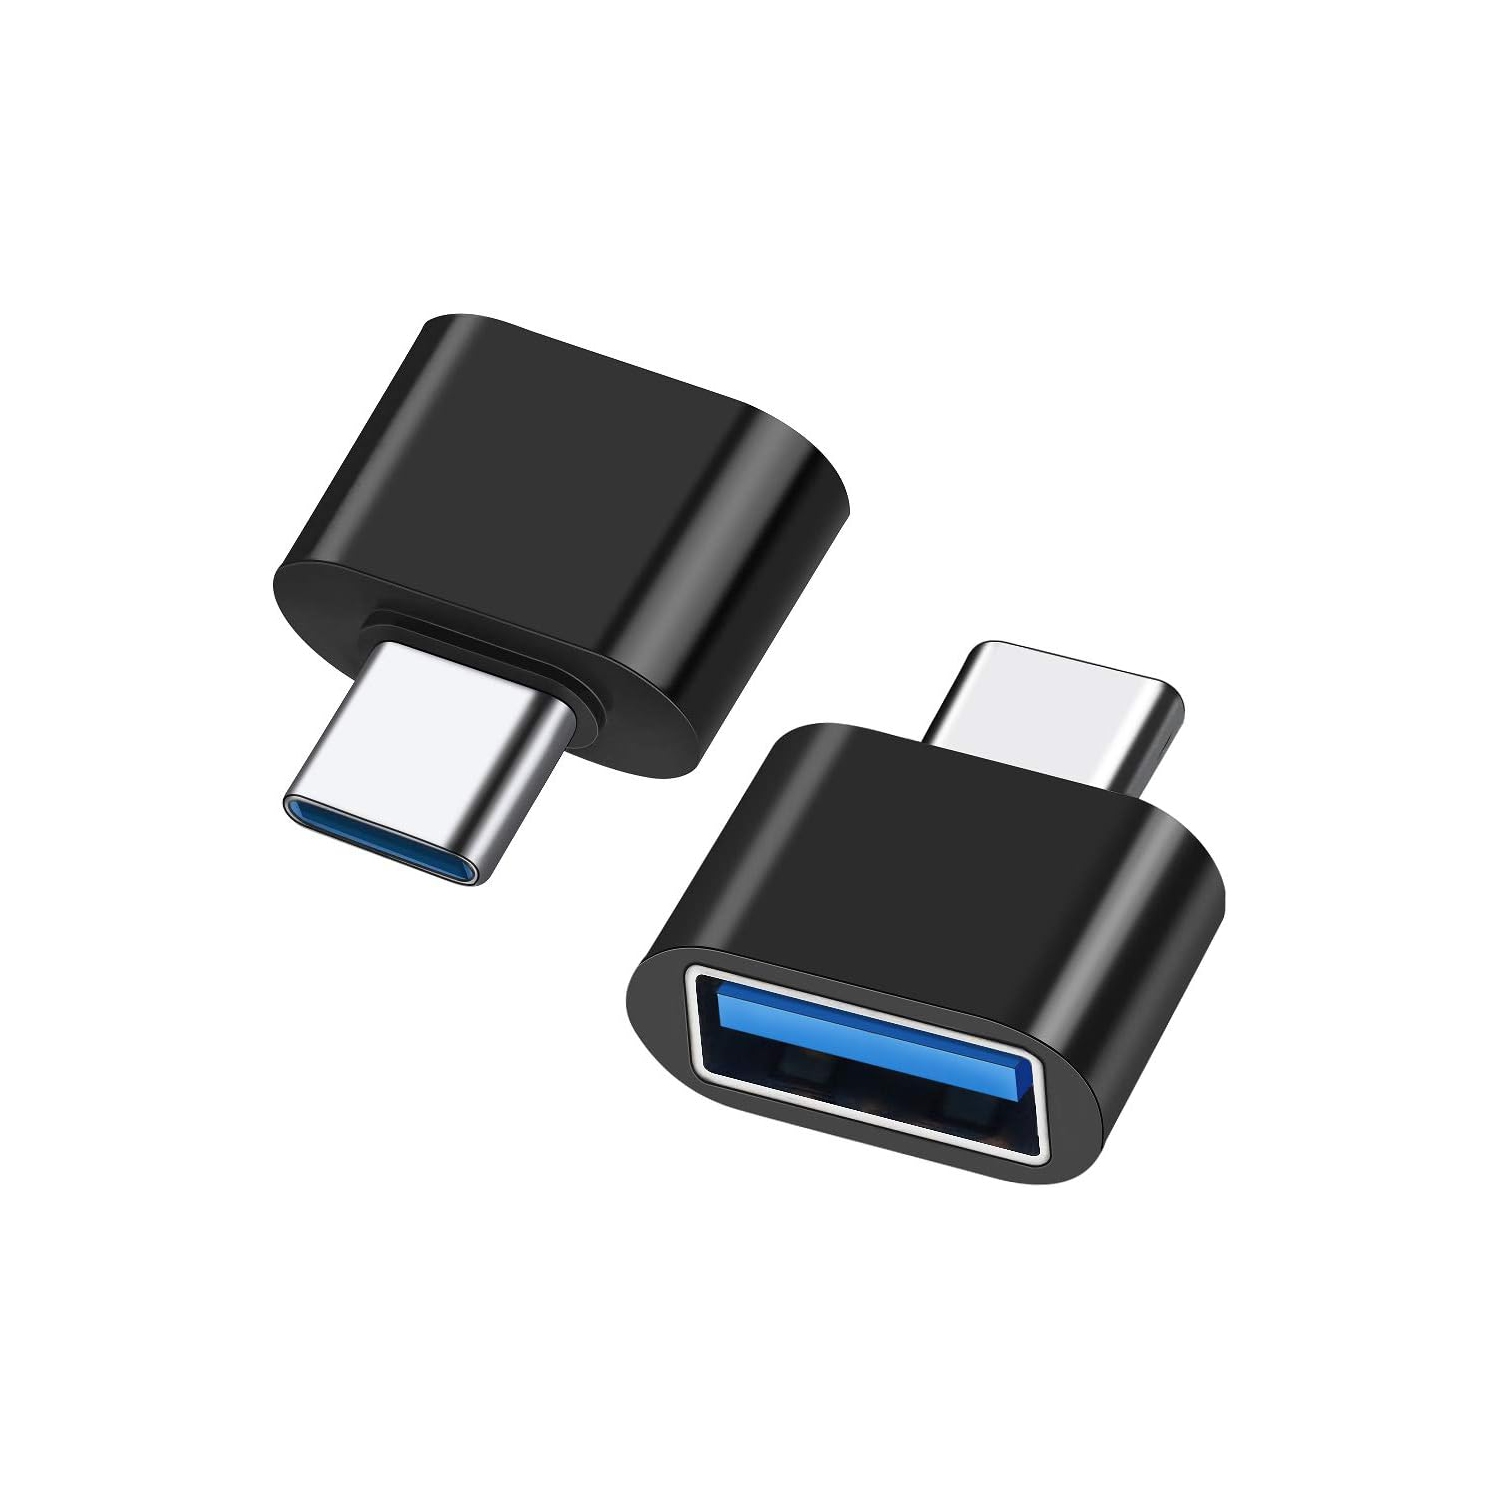 USB C to USB Adapter [2 Pack], L USB Type-C to USB 3.0 Adapter, USB C to USB A OTG Connector Compatible with Thunderbolt 3 MacBook Pro/Air 2019+,iPad Pro 2020,Samsung Note 8, S8 S8